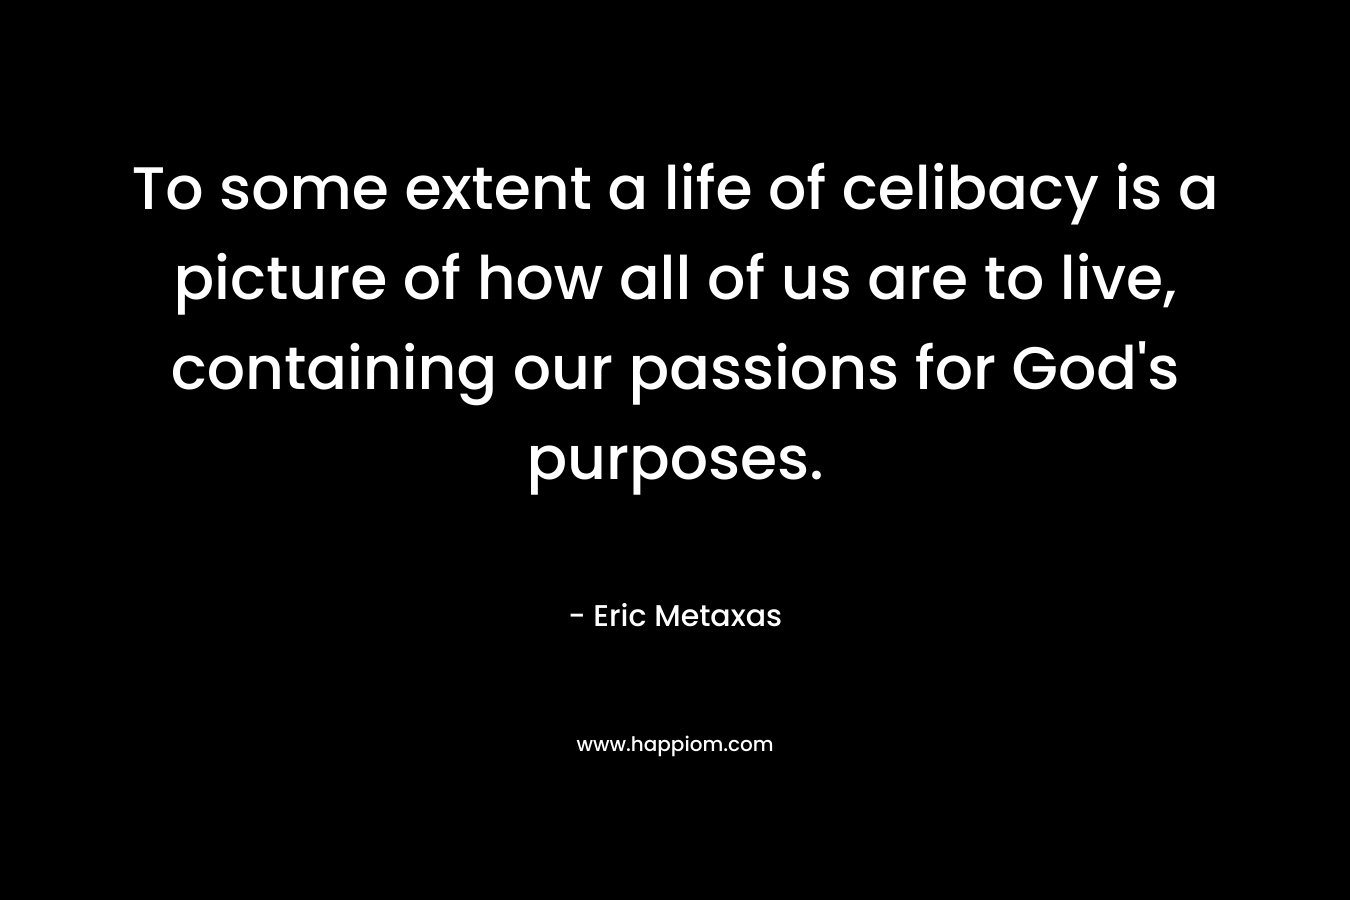 To some extent a life of celibacy is a picture of how all of us are to live, containing our passions for God’s purposes. – Eric Metaxas